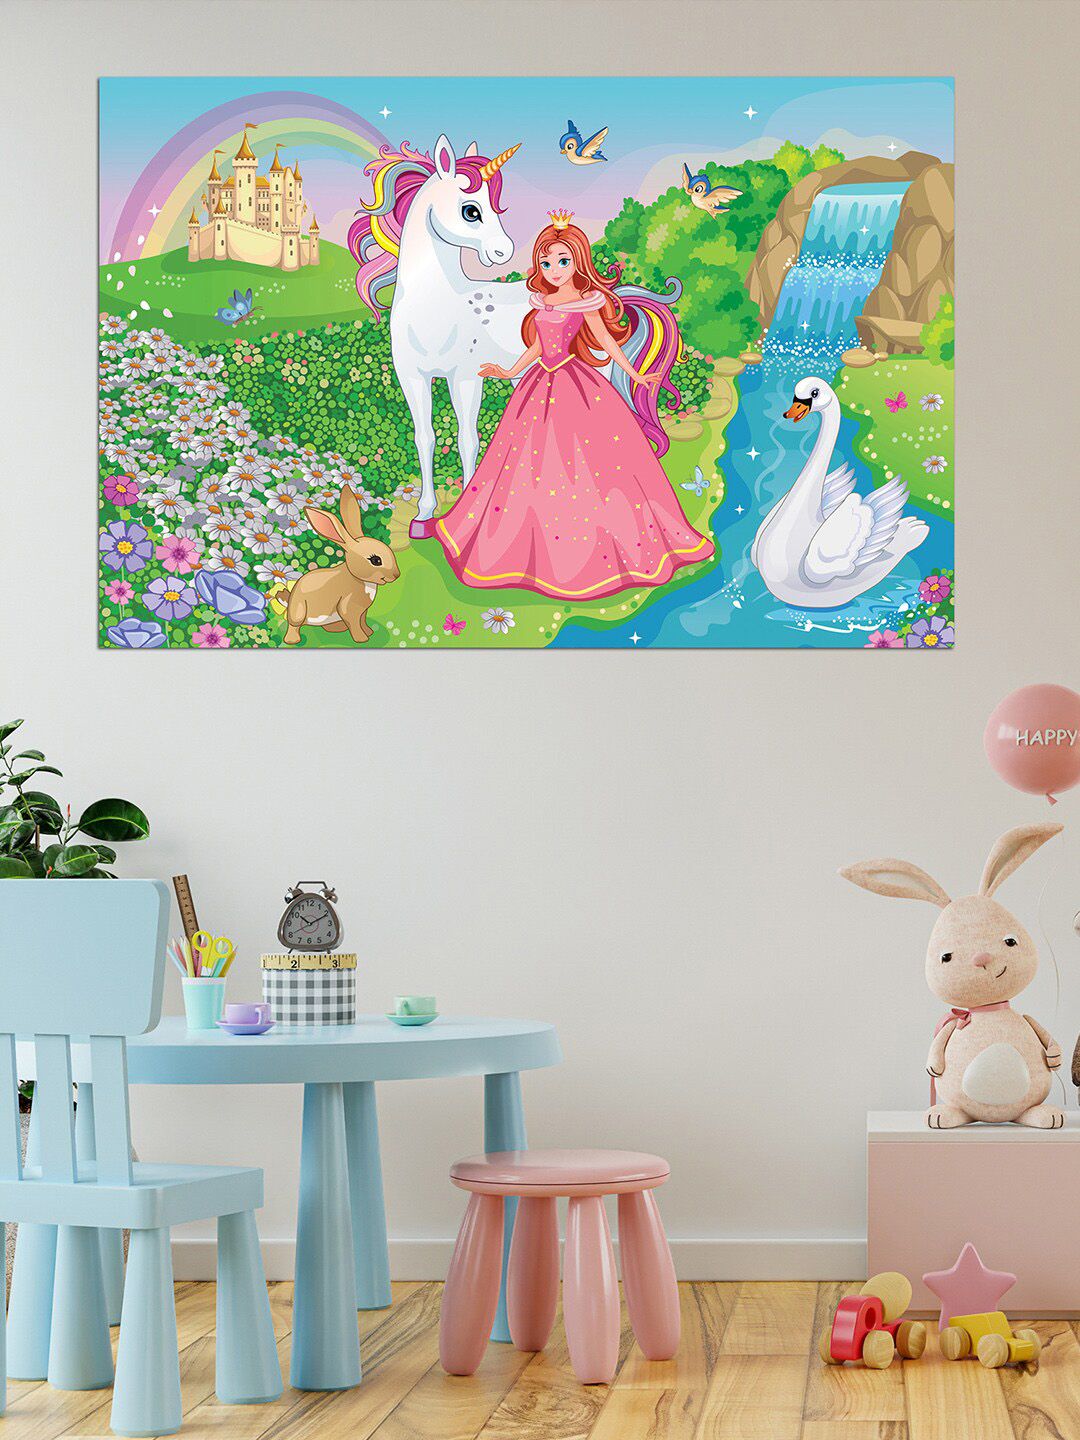 WENS Blue & Green Magical Unicorn With Princess Wall Sticker Price in India